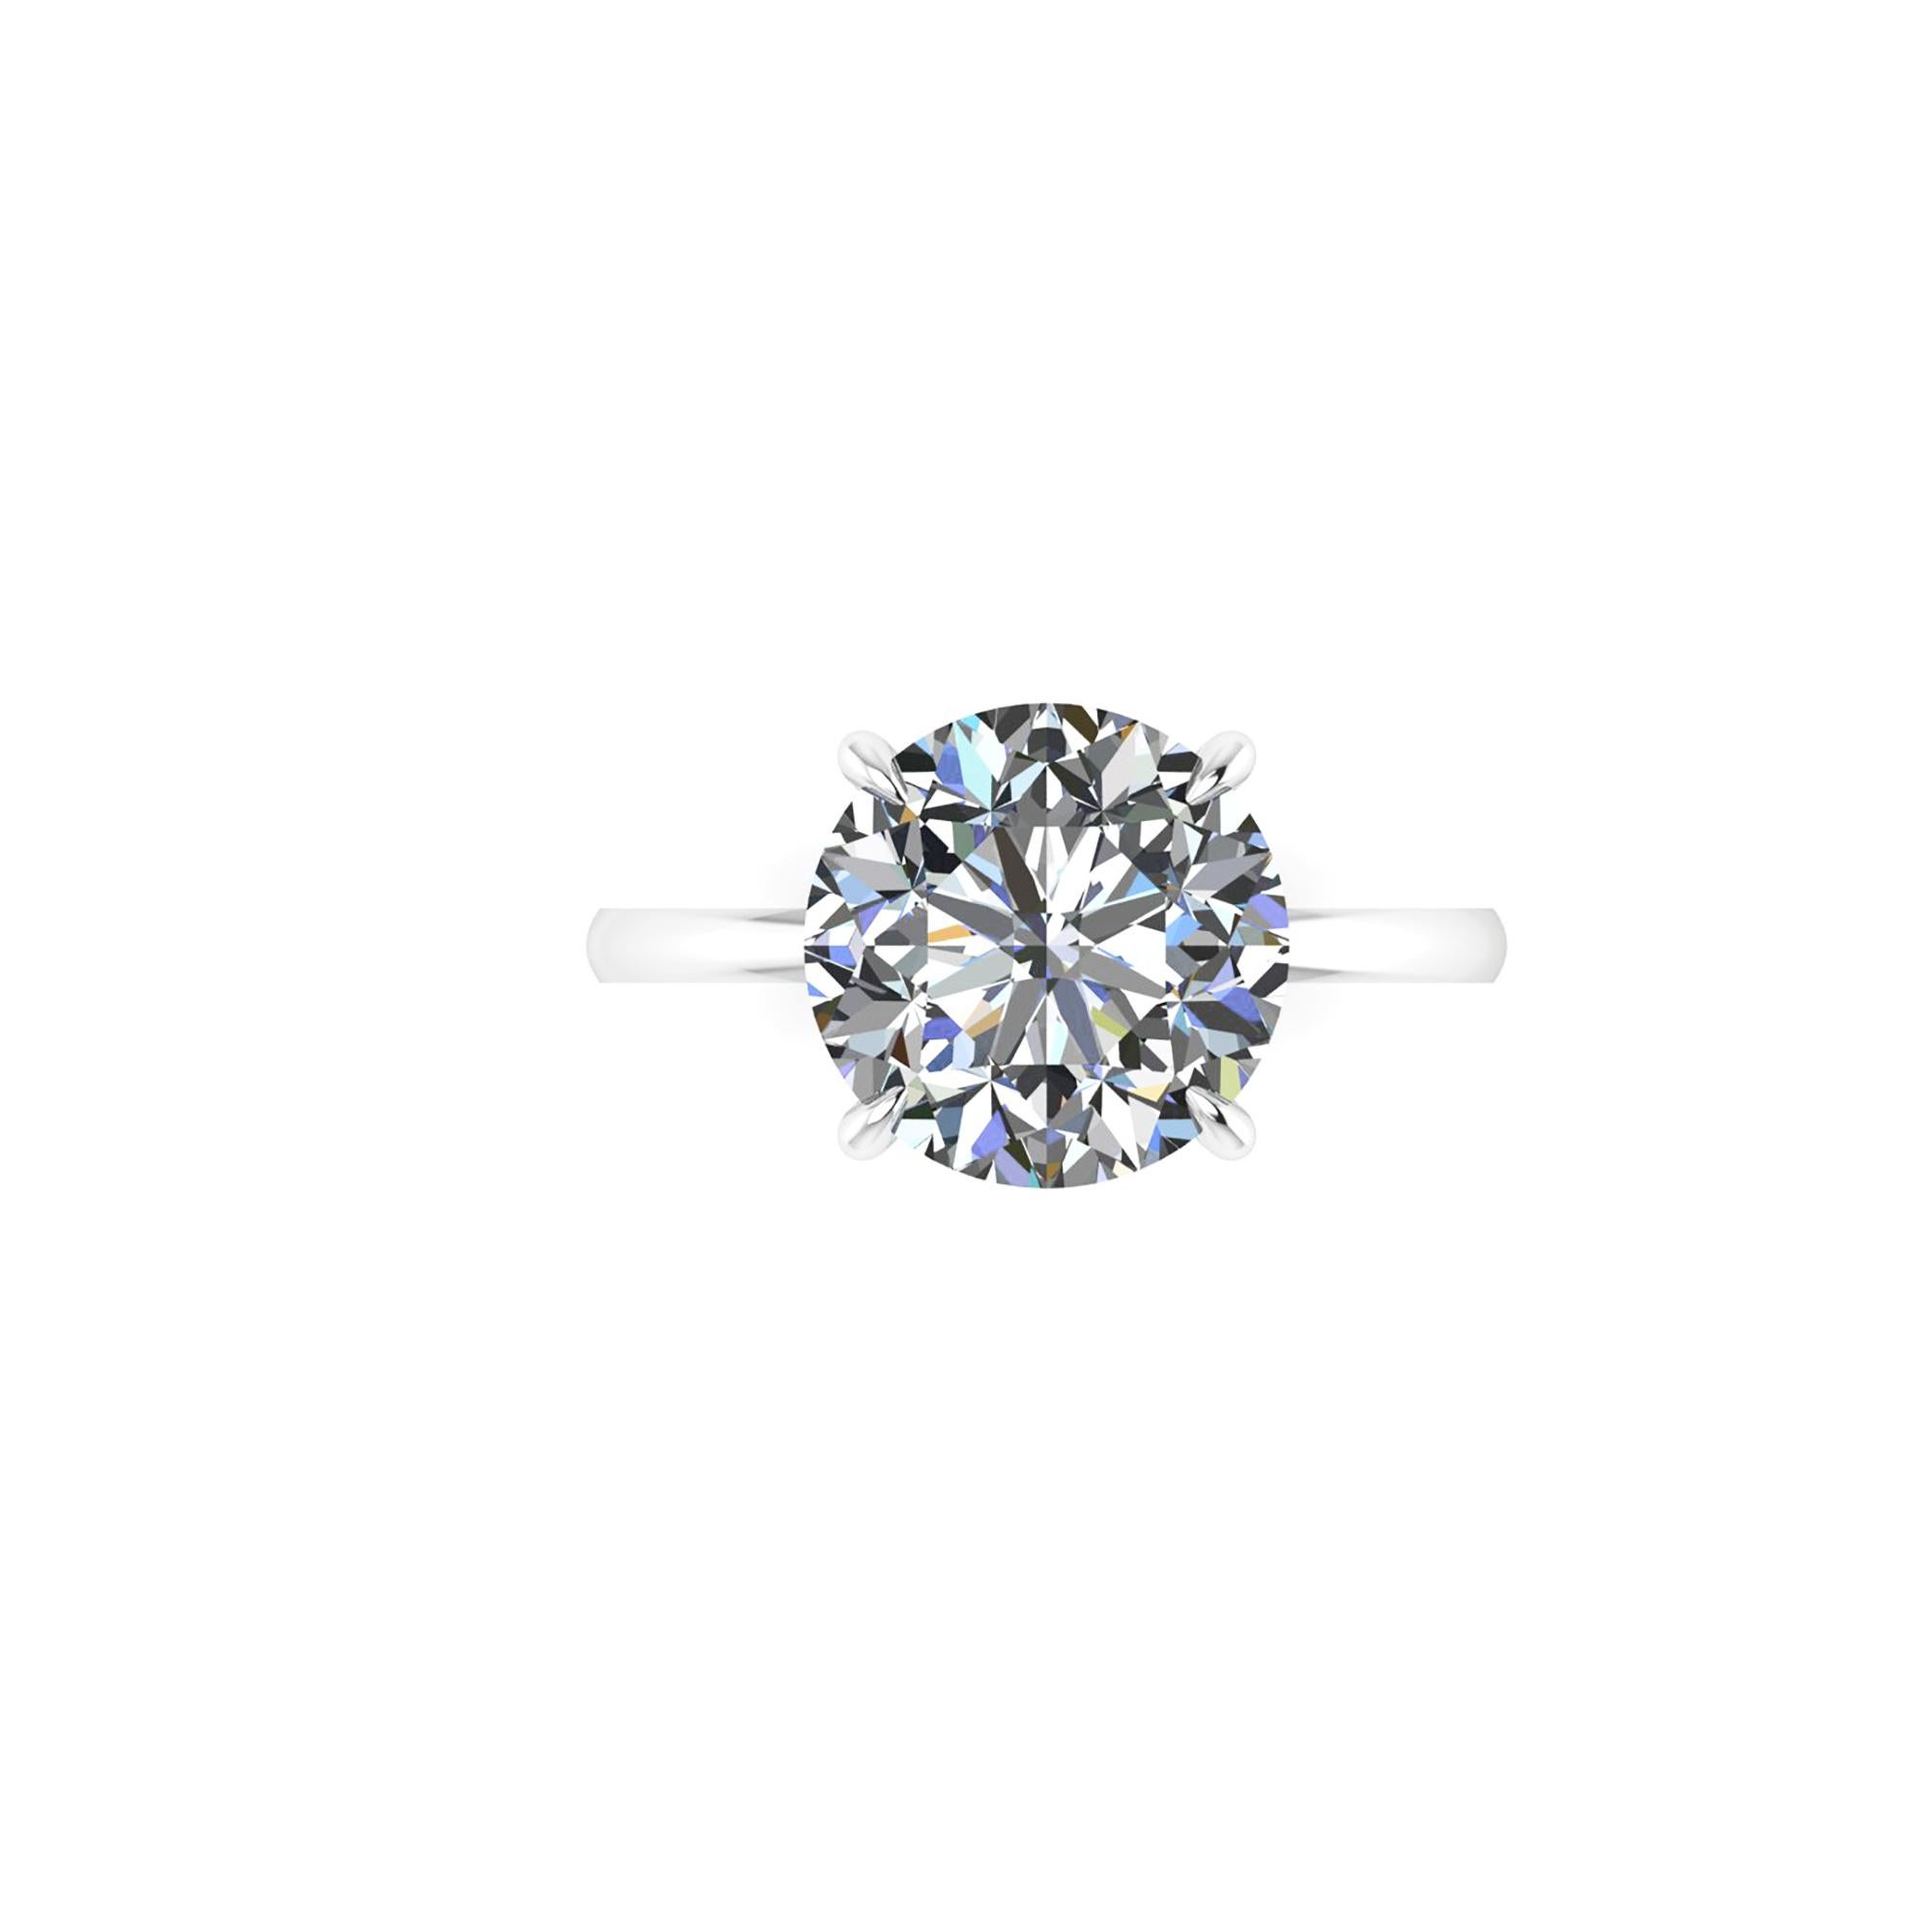 GIA Certified 4.09 Carat Round Diamond Platinum 950 Solitaire Ring In New Condition For Sale In New York, NY